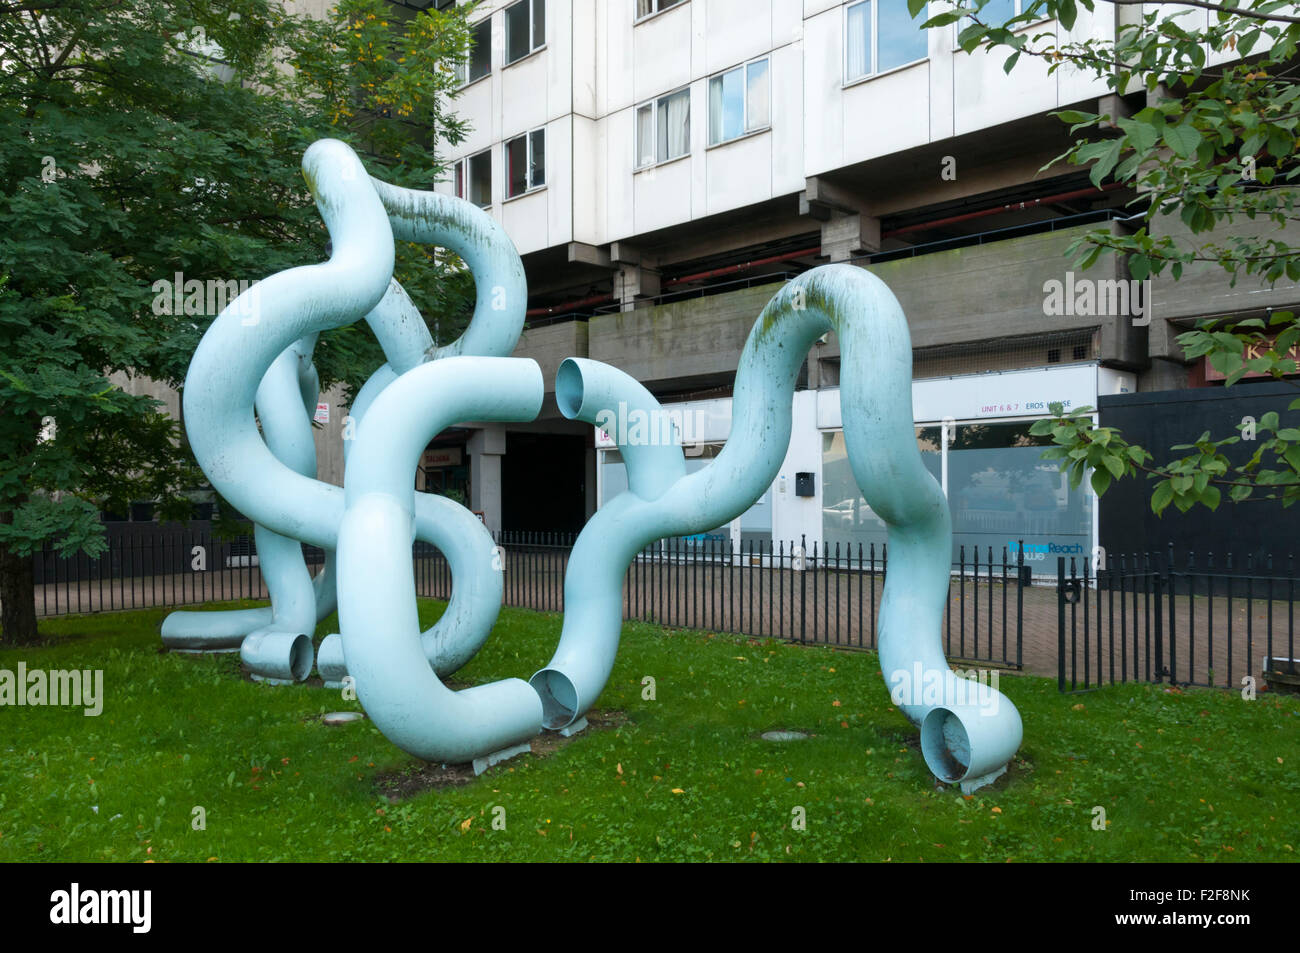 Waterline by Oliver Barratt in Lewisham High Street, South London.  SEE DESCRIPTION FOR DETAILS. Stock Photo